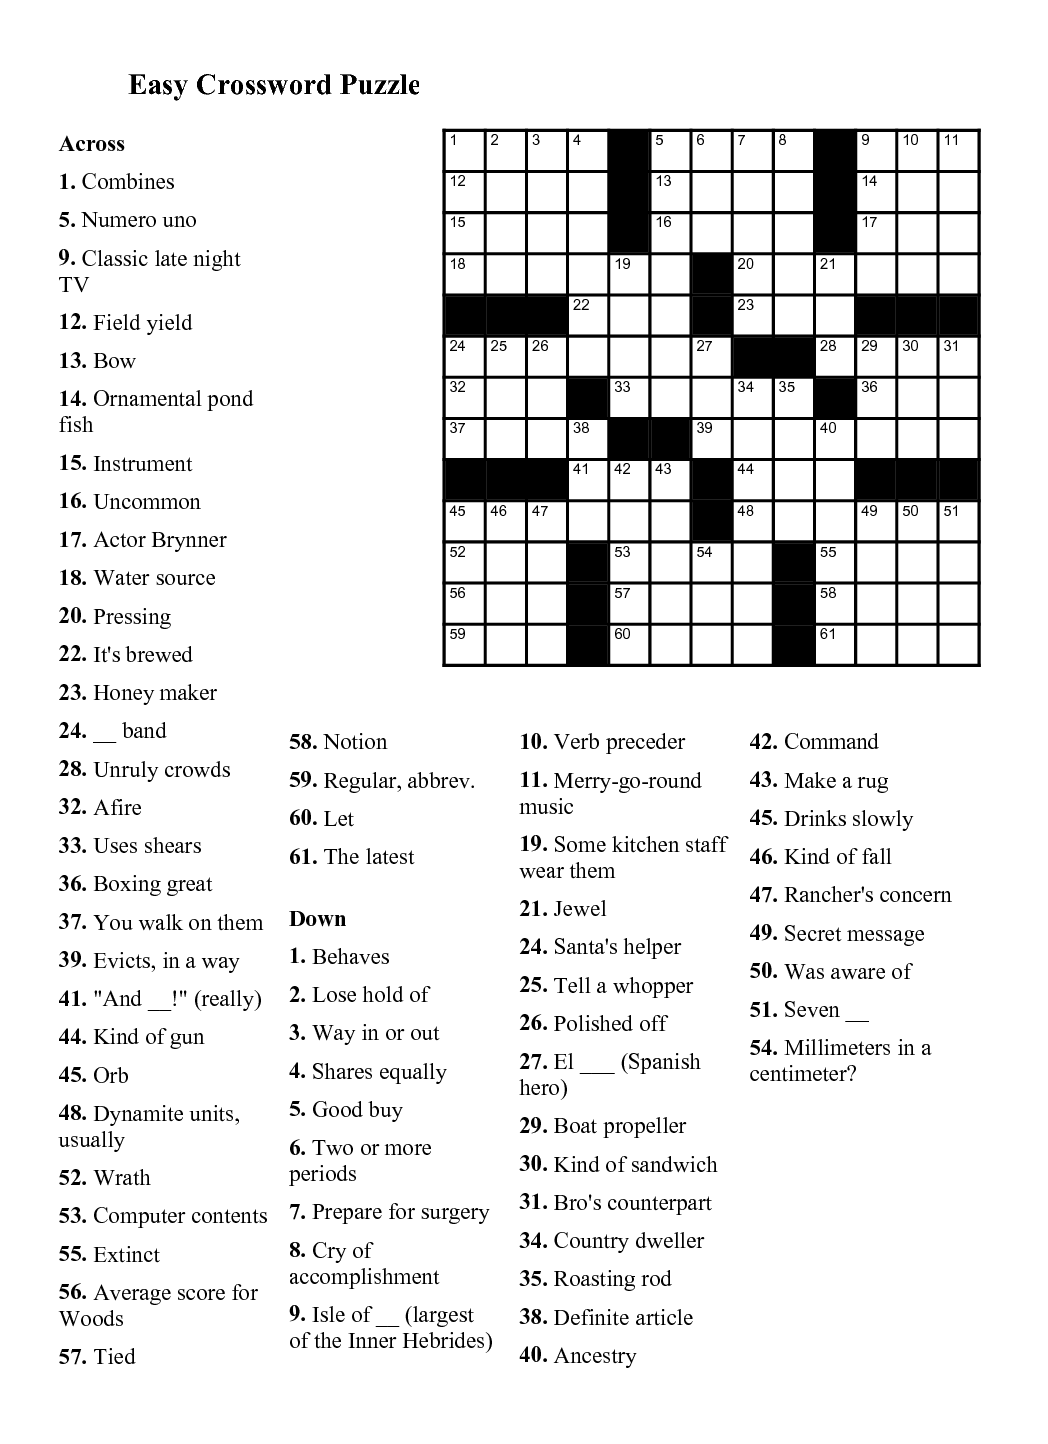 Easy Crossword Puzzles Printable Daily Template,How Do You Get Rid Of Bamboo Roots